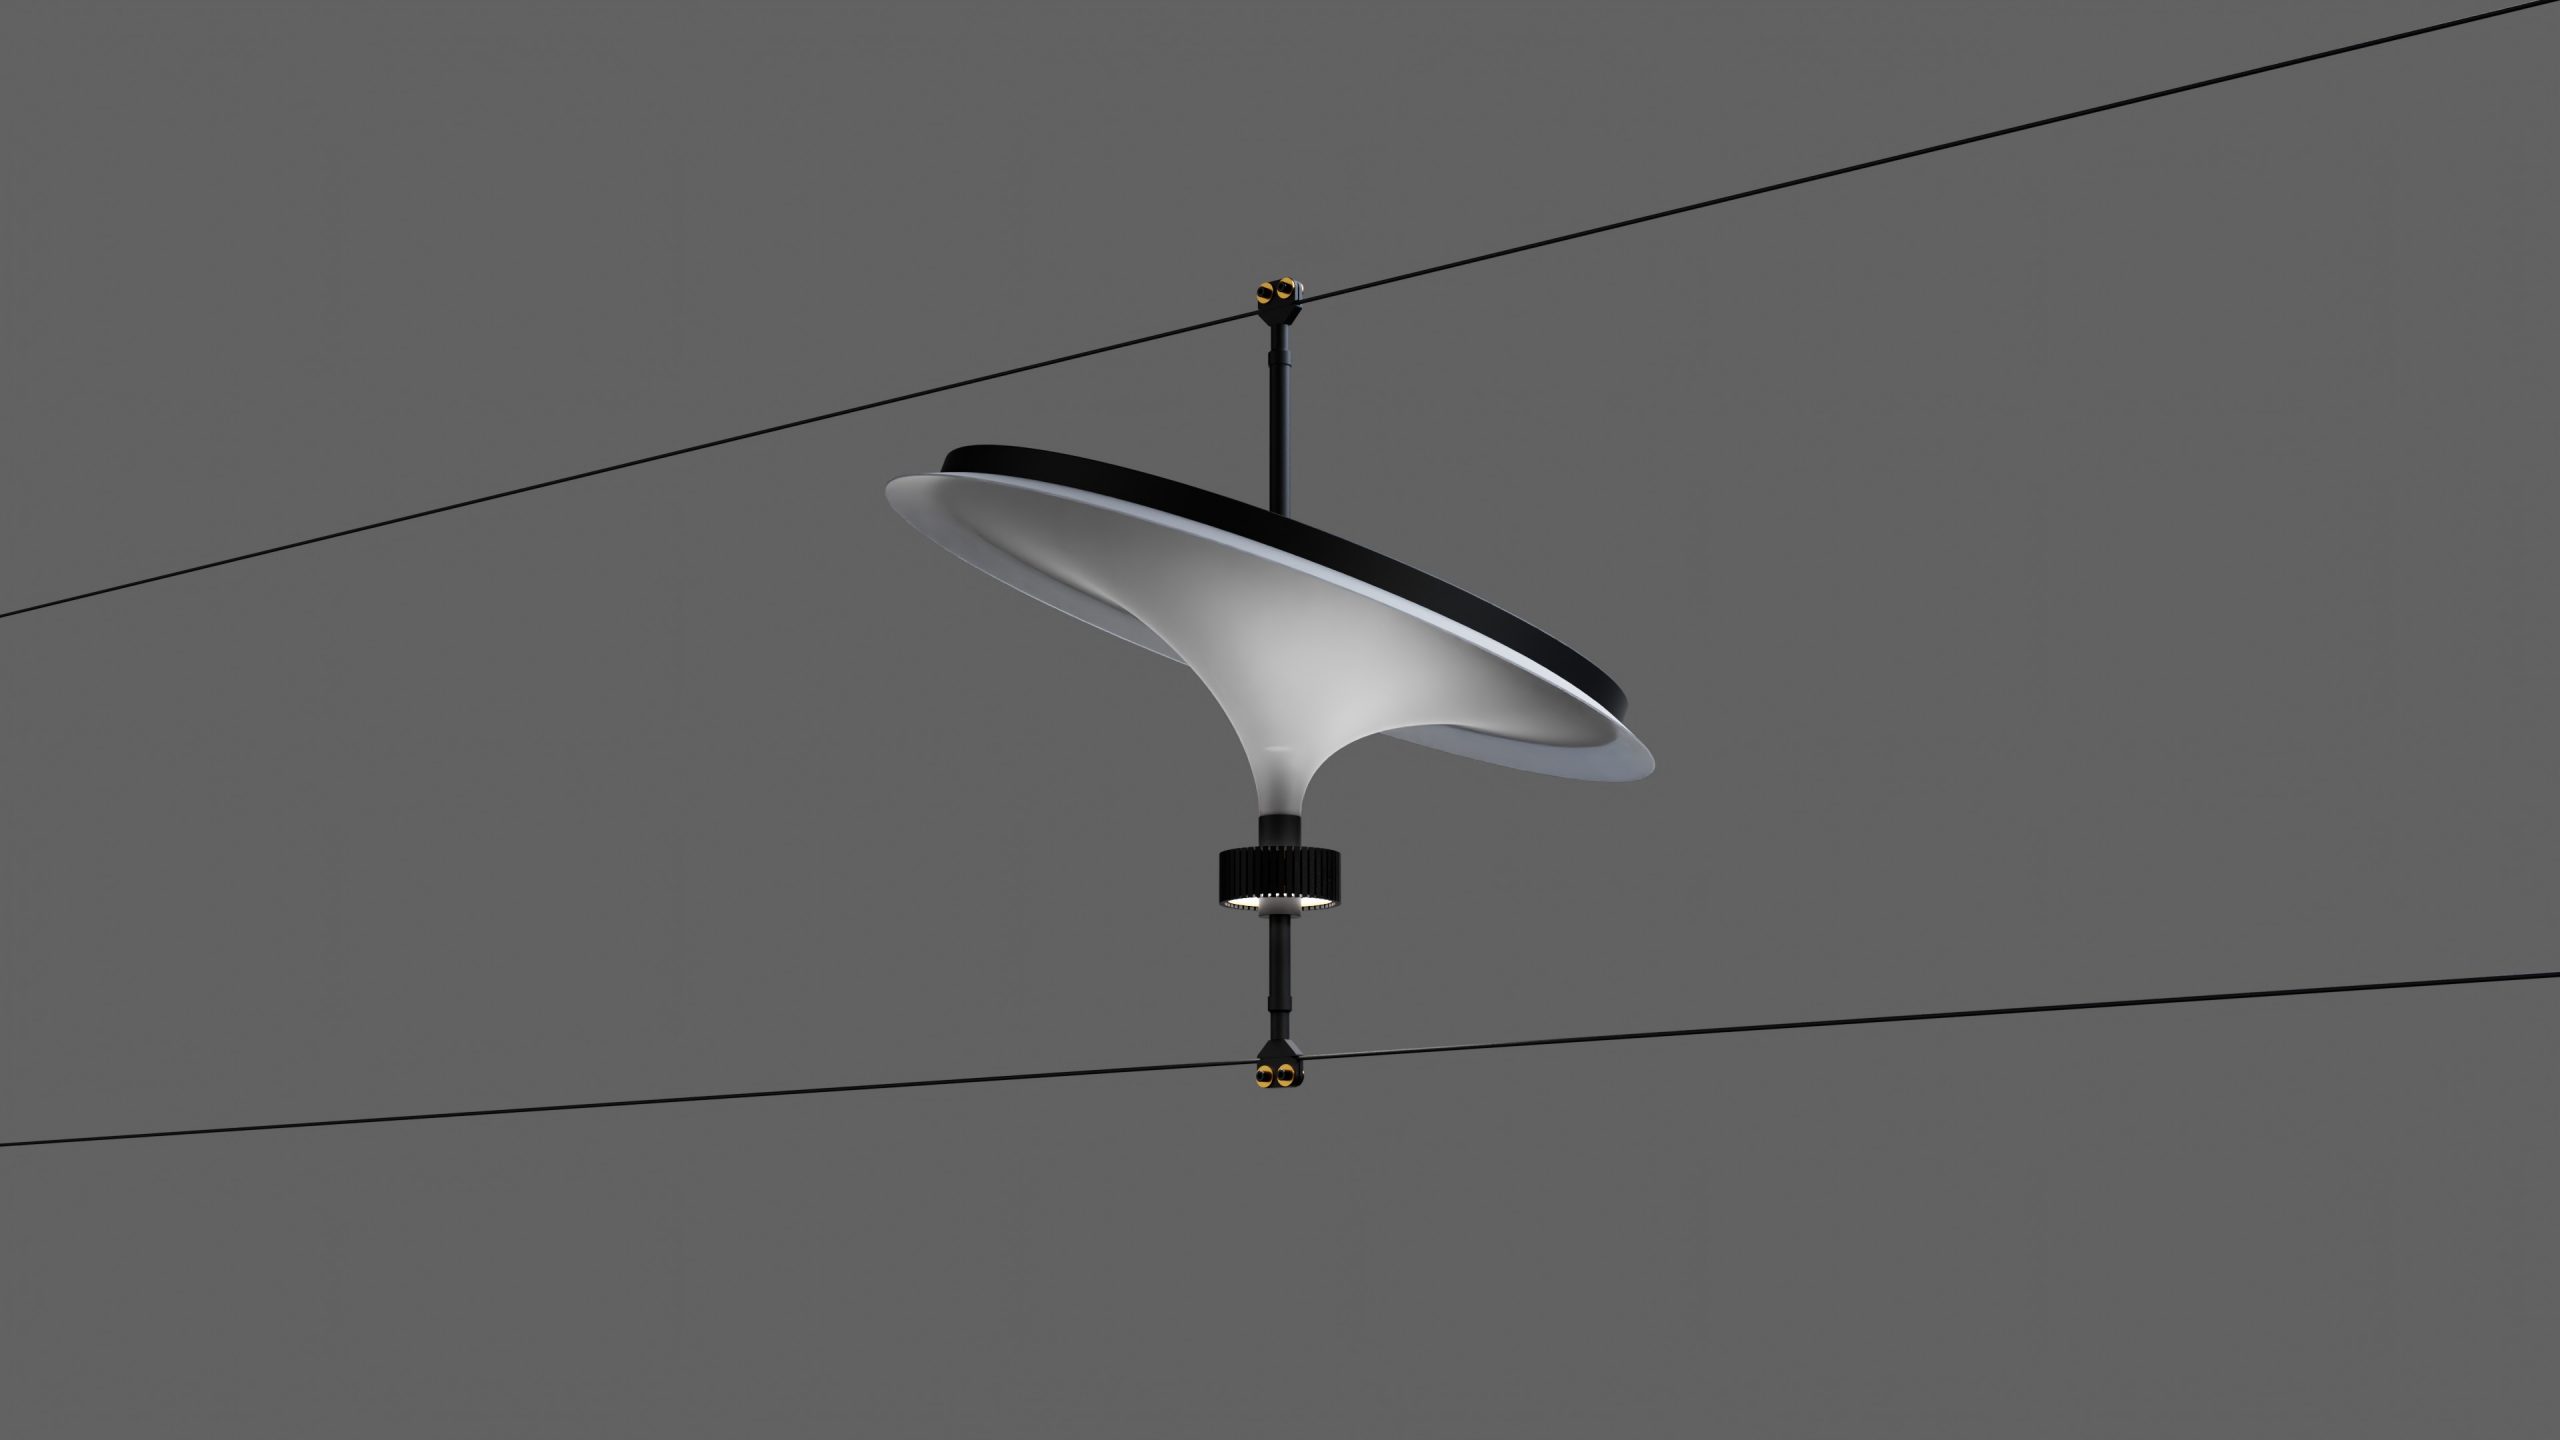 Illuminated Sunseeker black and white Render where its suspended between to steel cables.